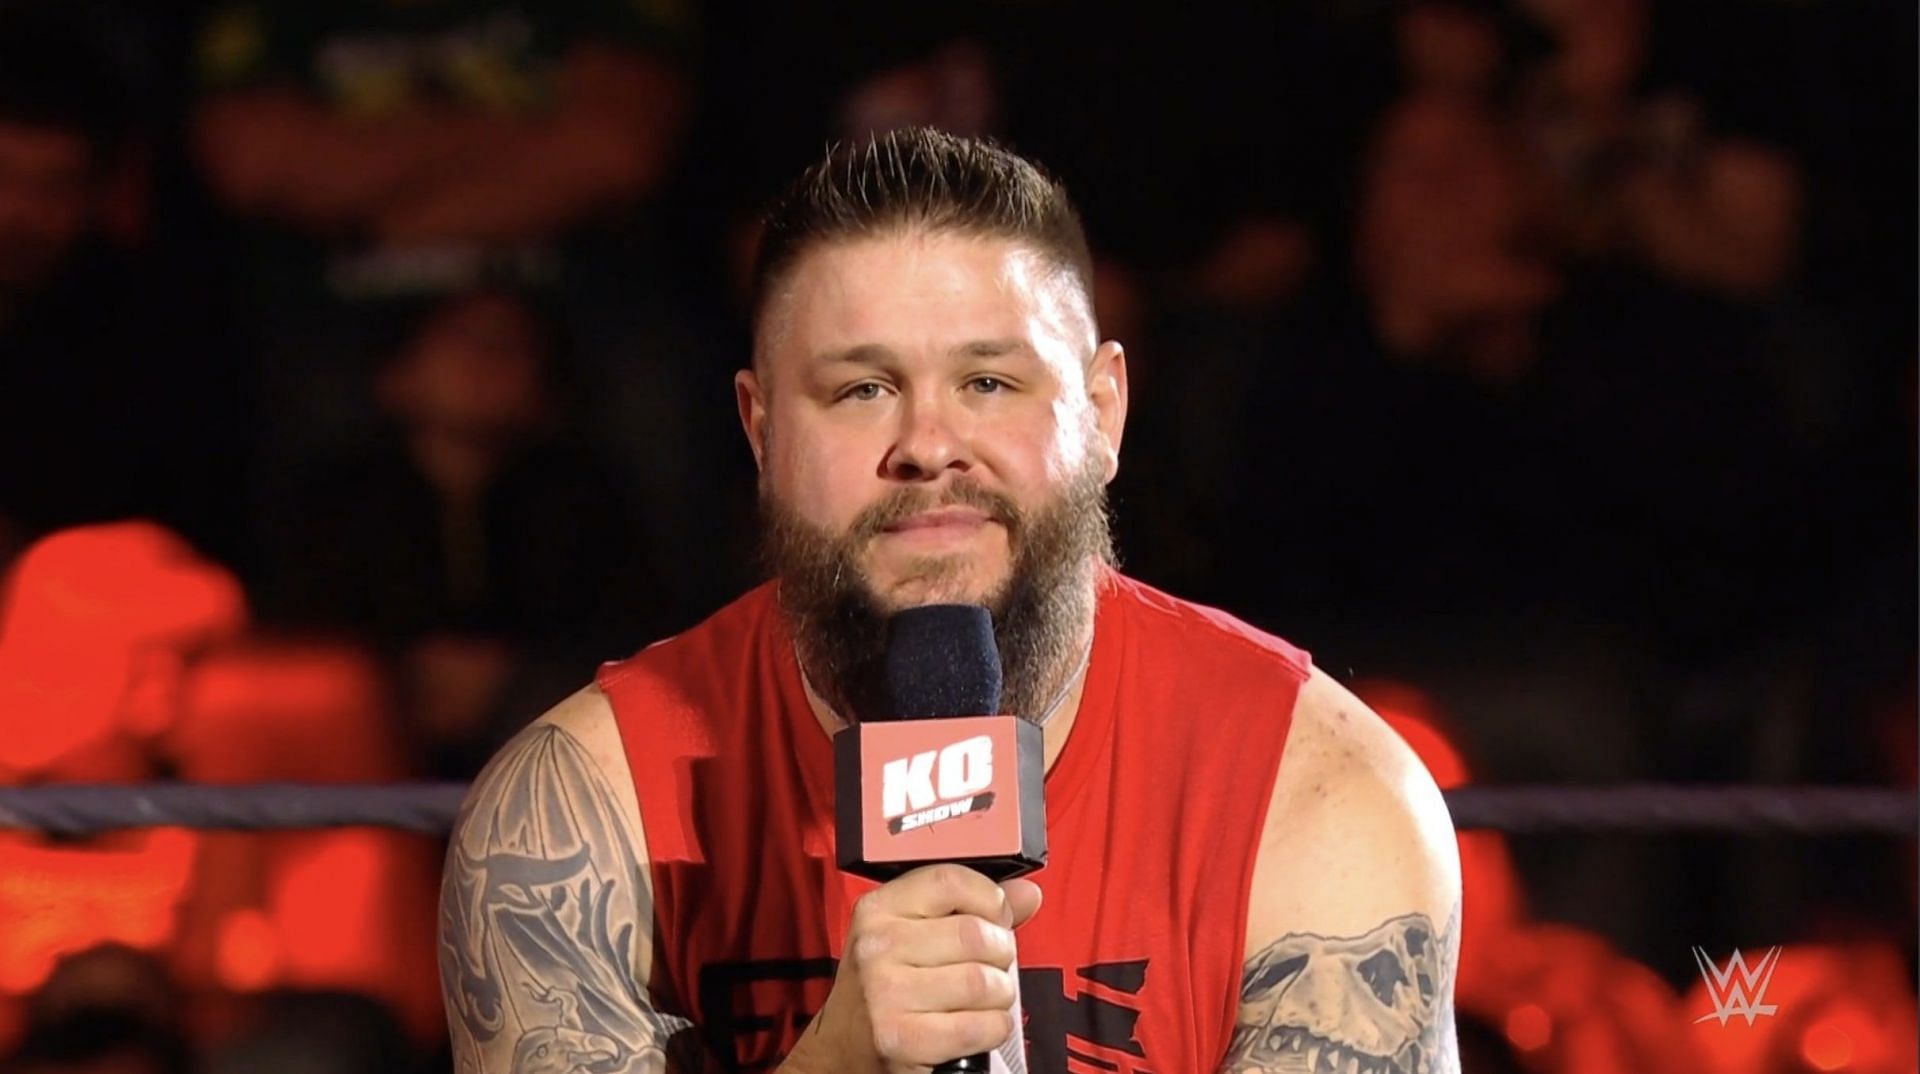 Kevin Owens always delivers in his angles.